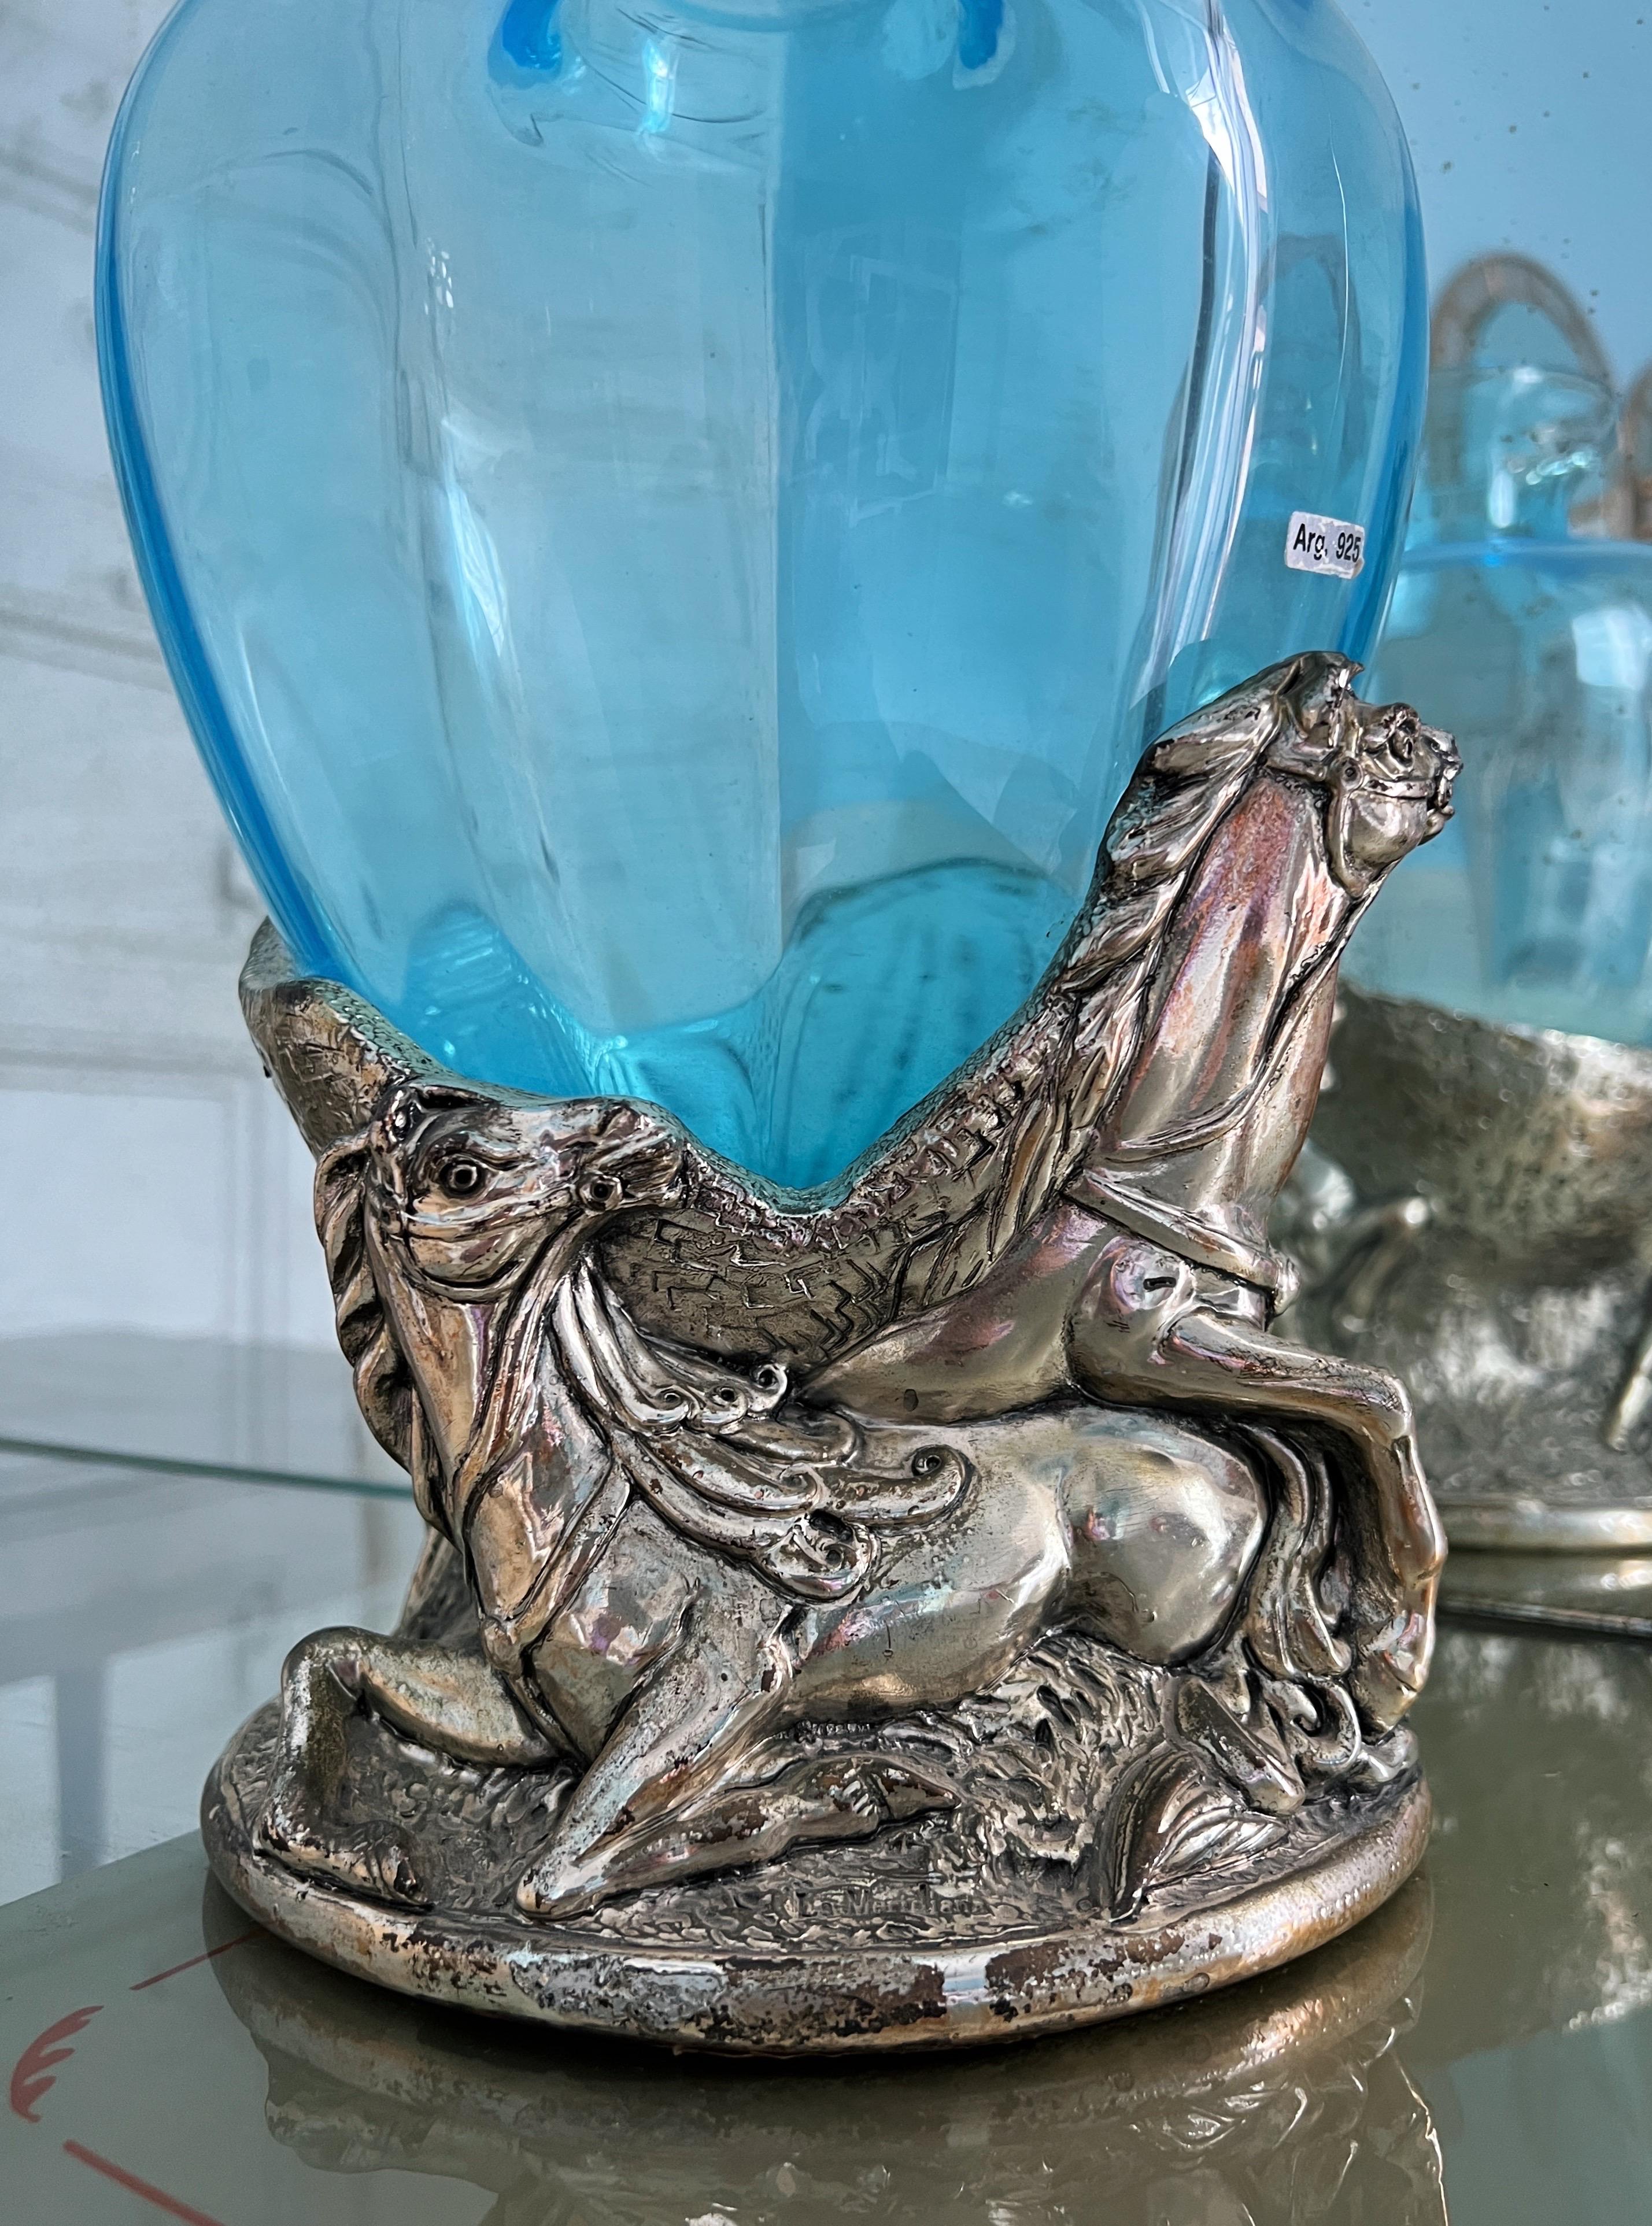 Italian Mid-century modern Murano glass vase adorned with an sculpture featuring horses For Sale